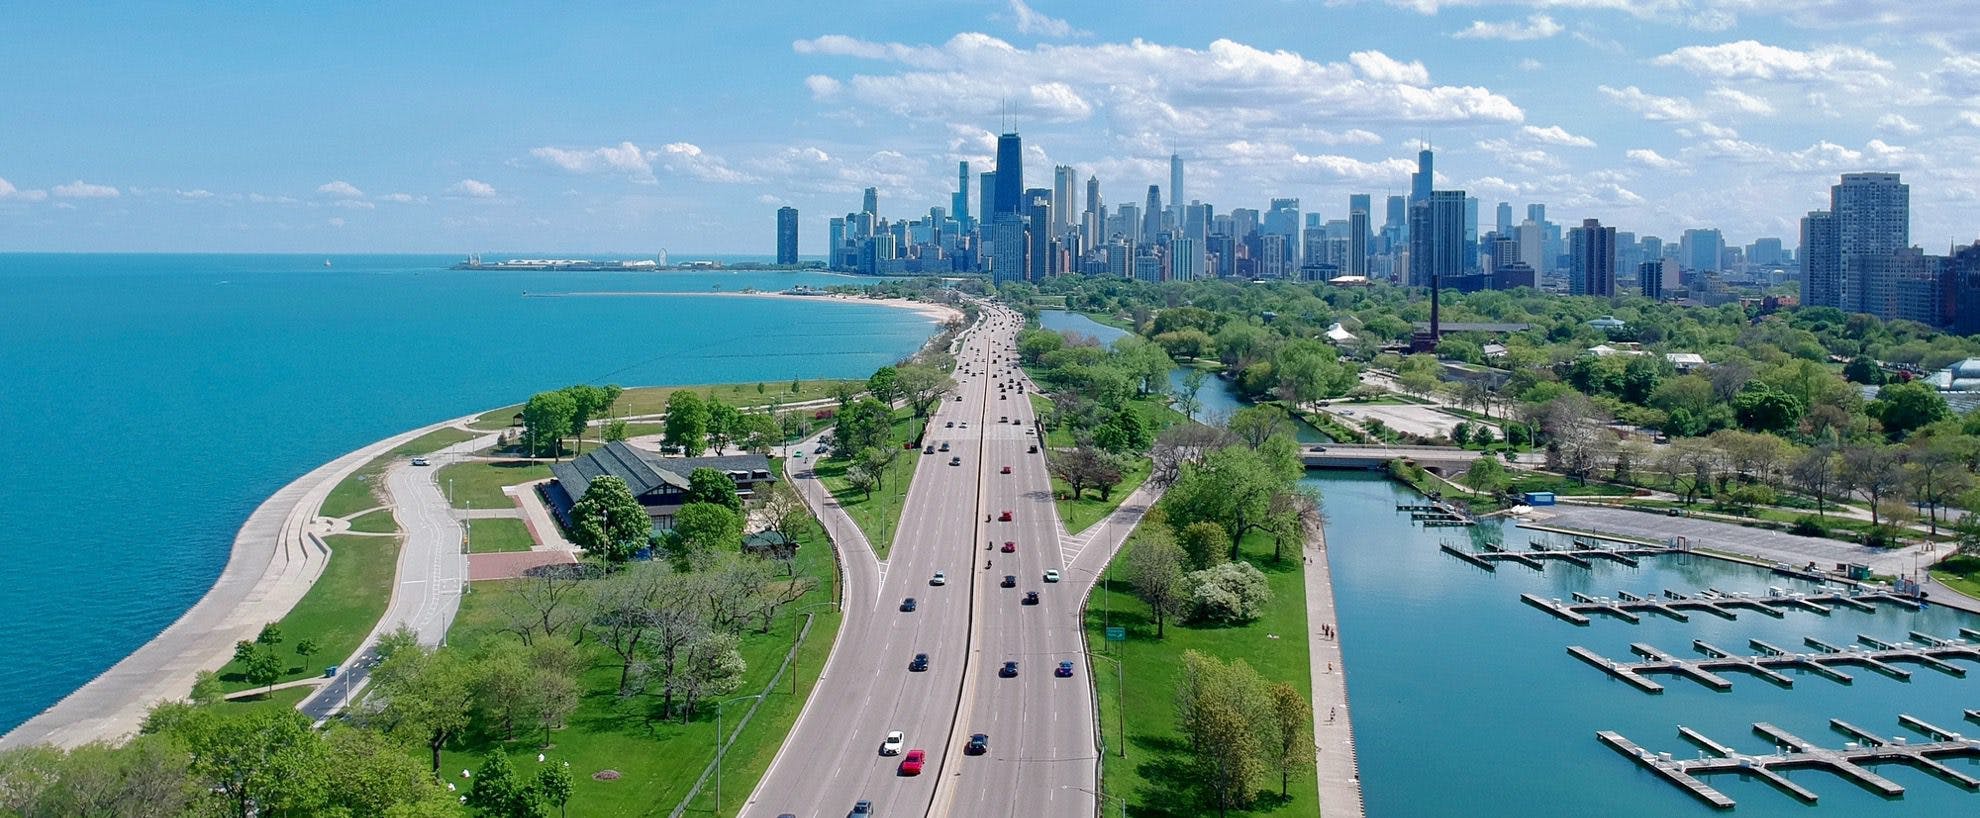 Chicago’s Lake Shore Drive – ‘there ain’t no road like it’